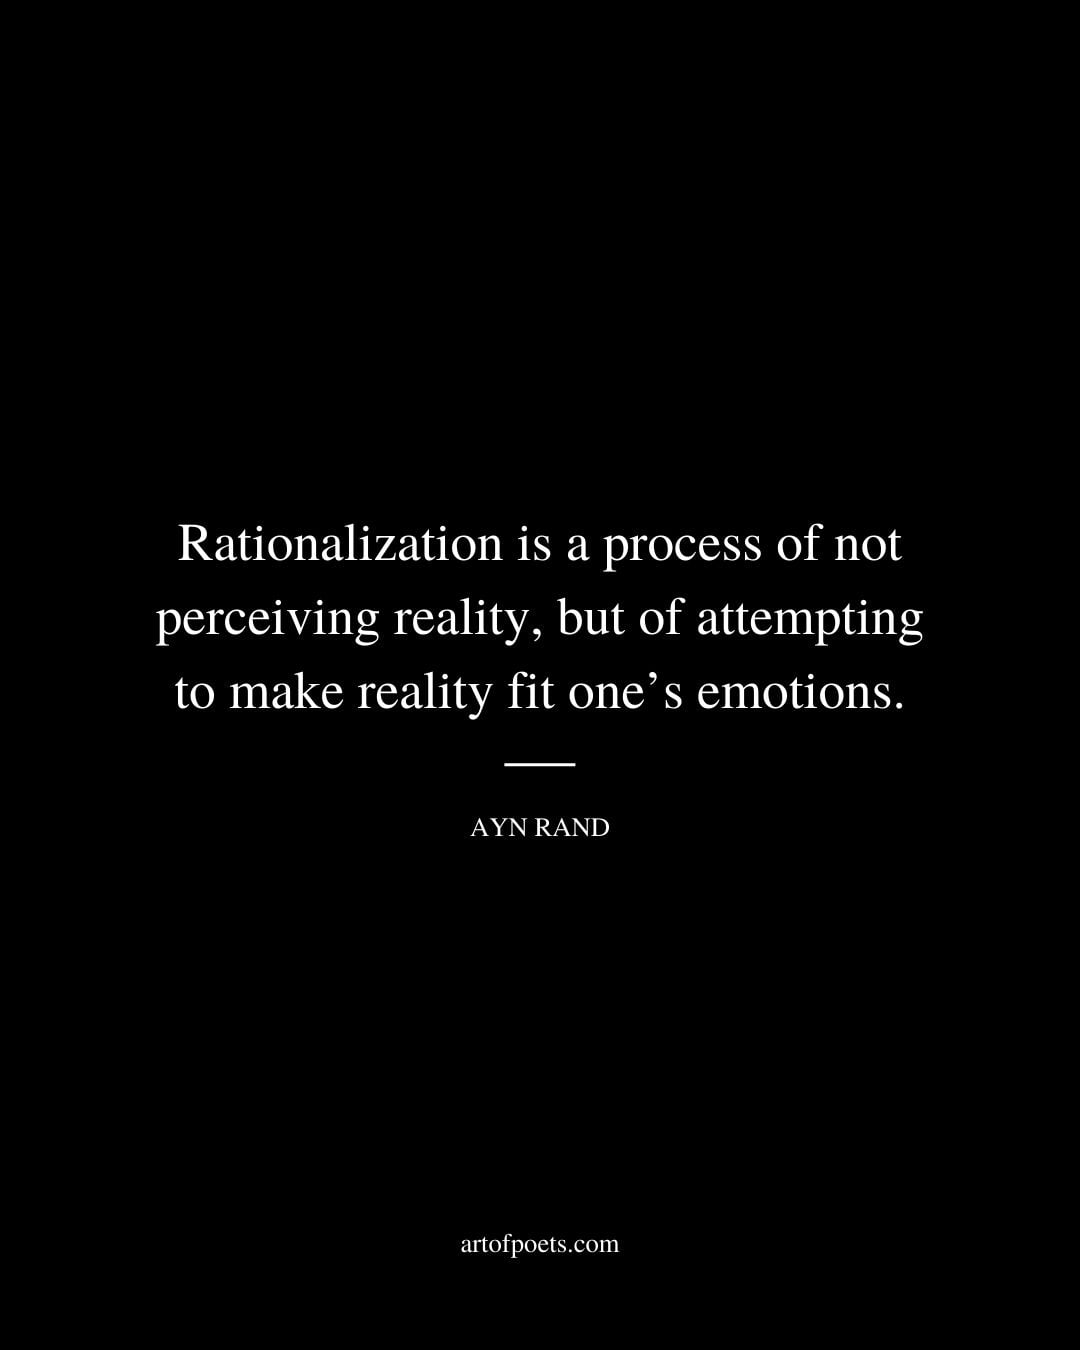 Rationalization is a process of not perceiving reality but of attempting to make reality fit ones emotions